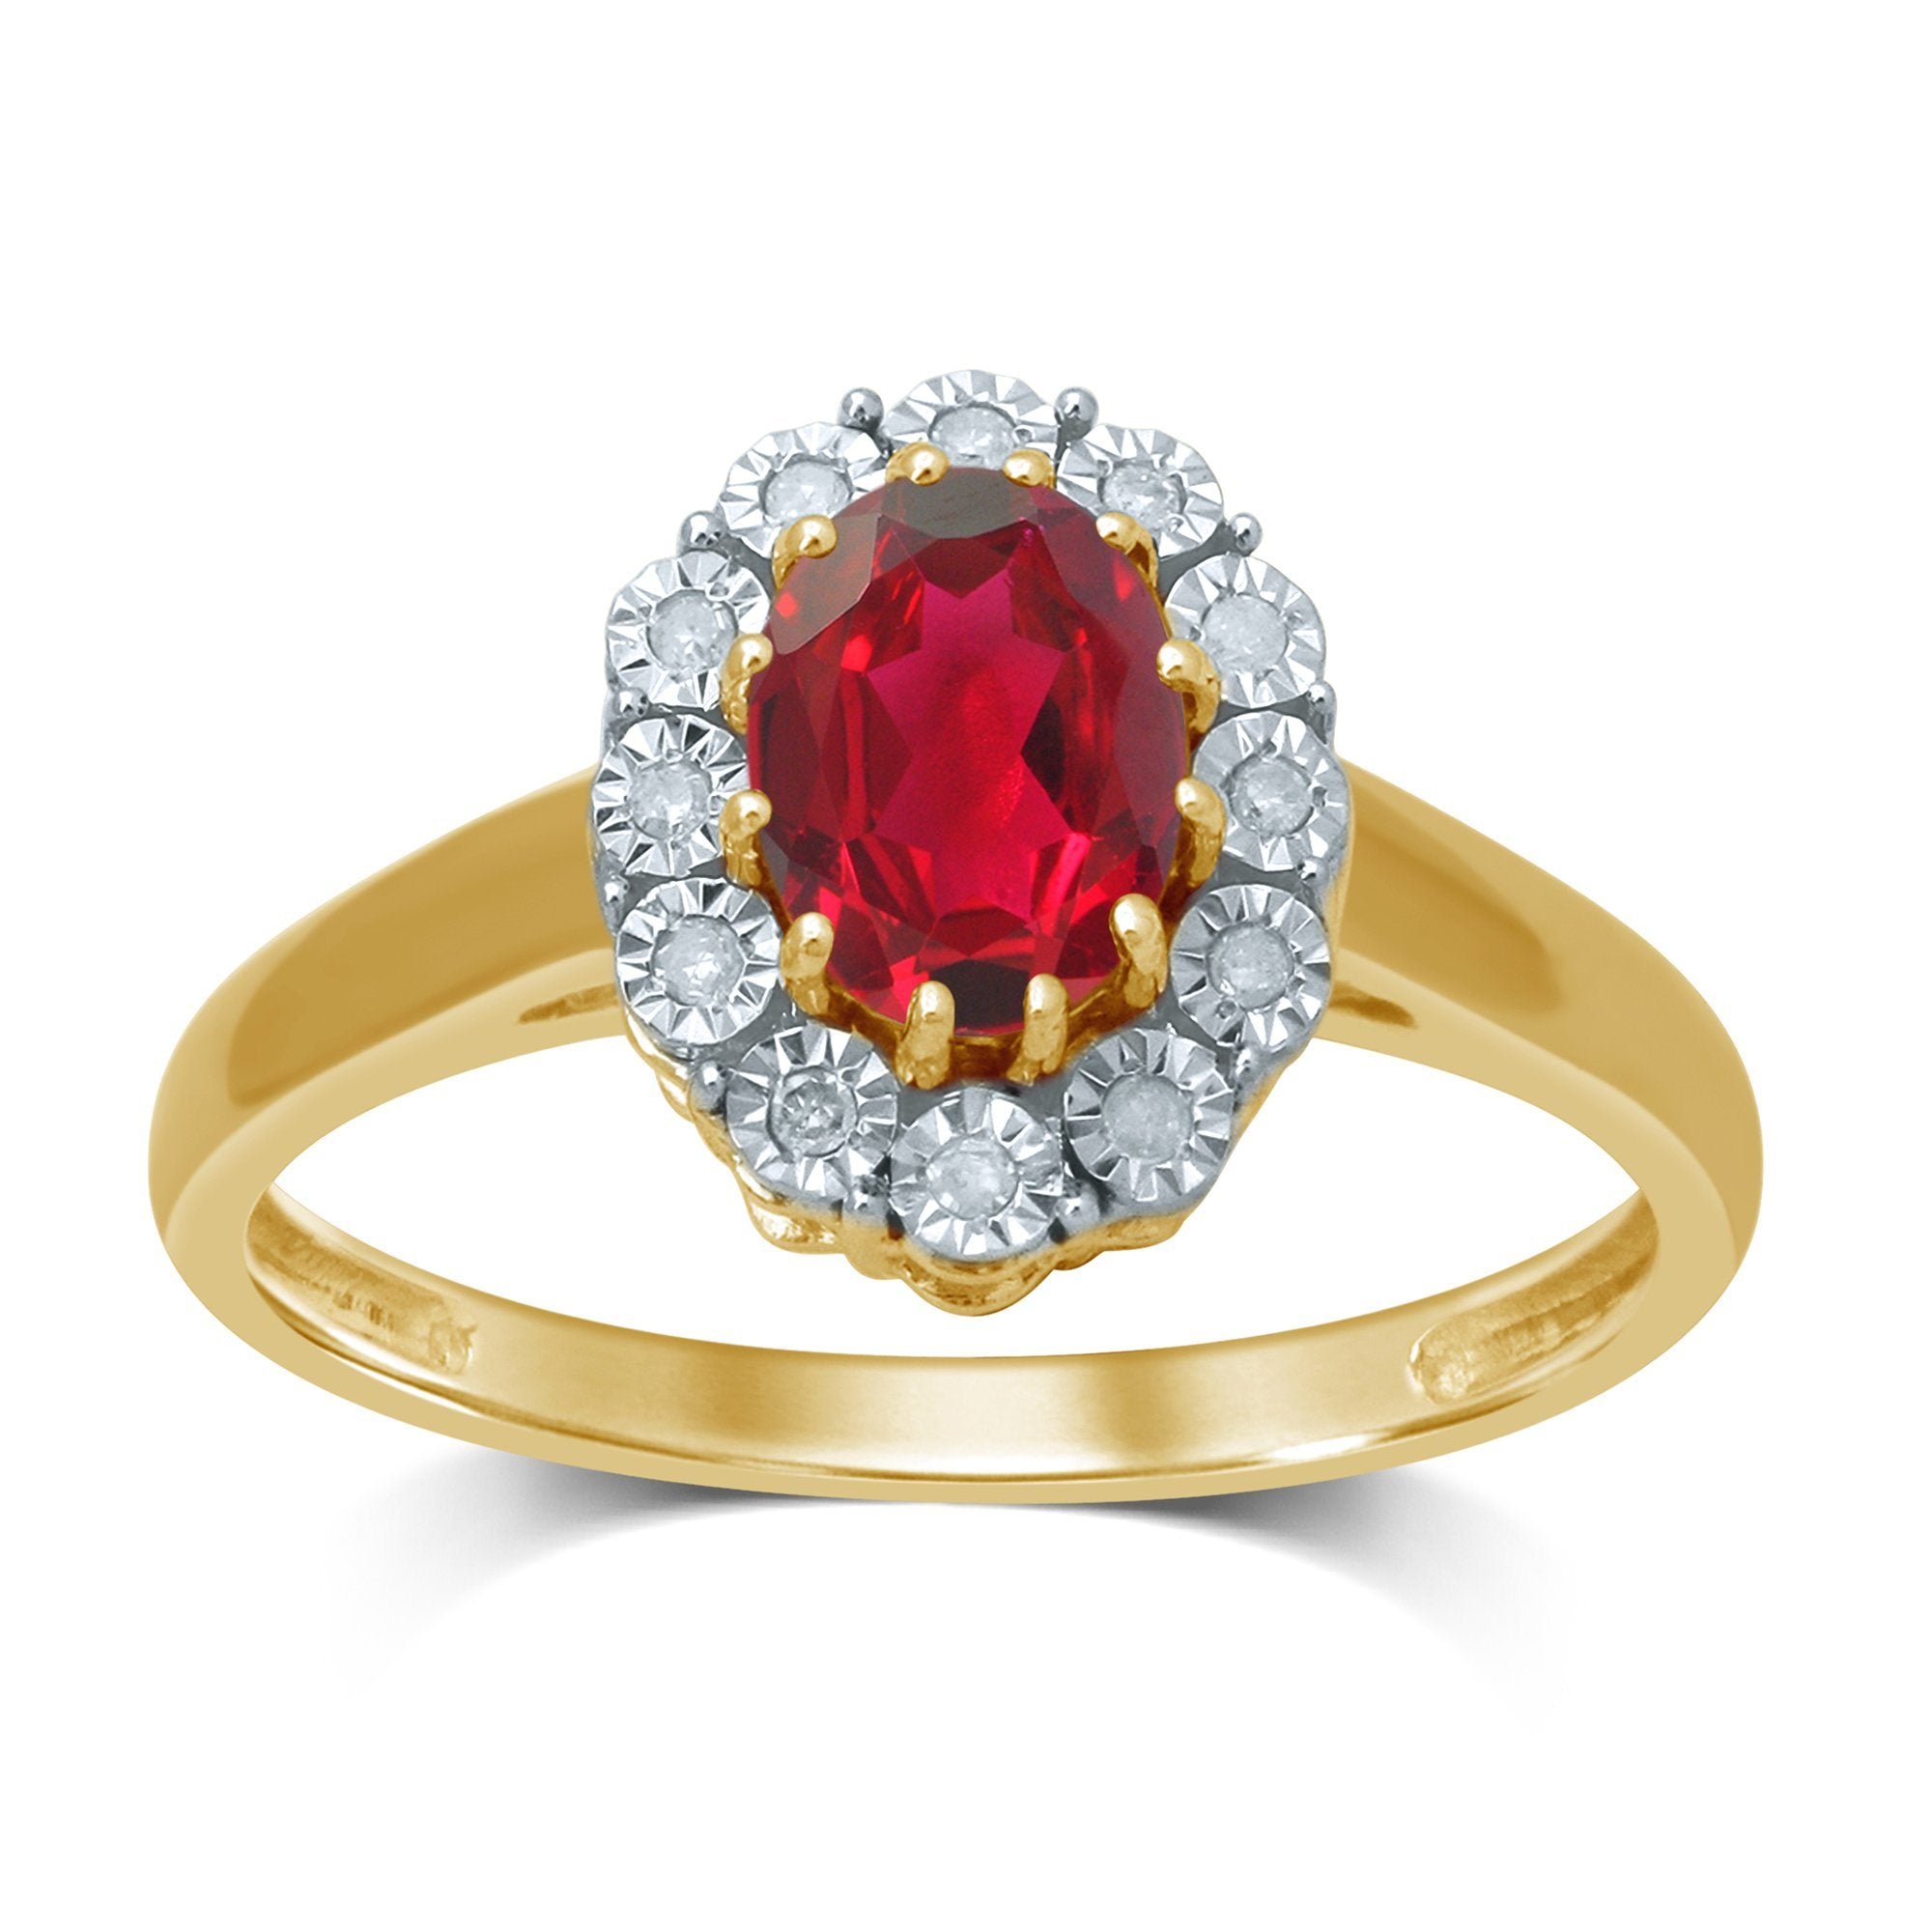 Diamond Set Oval Created Ruby Ring in 9ct Yellow Gold Rings Bevilles 